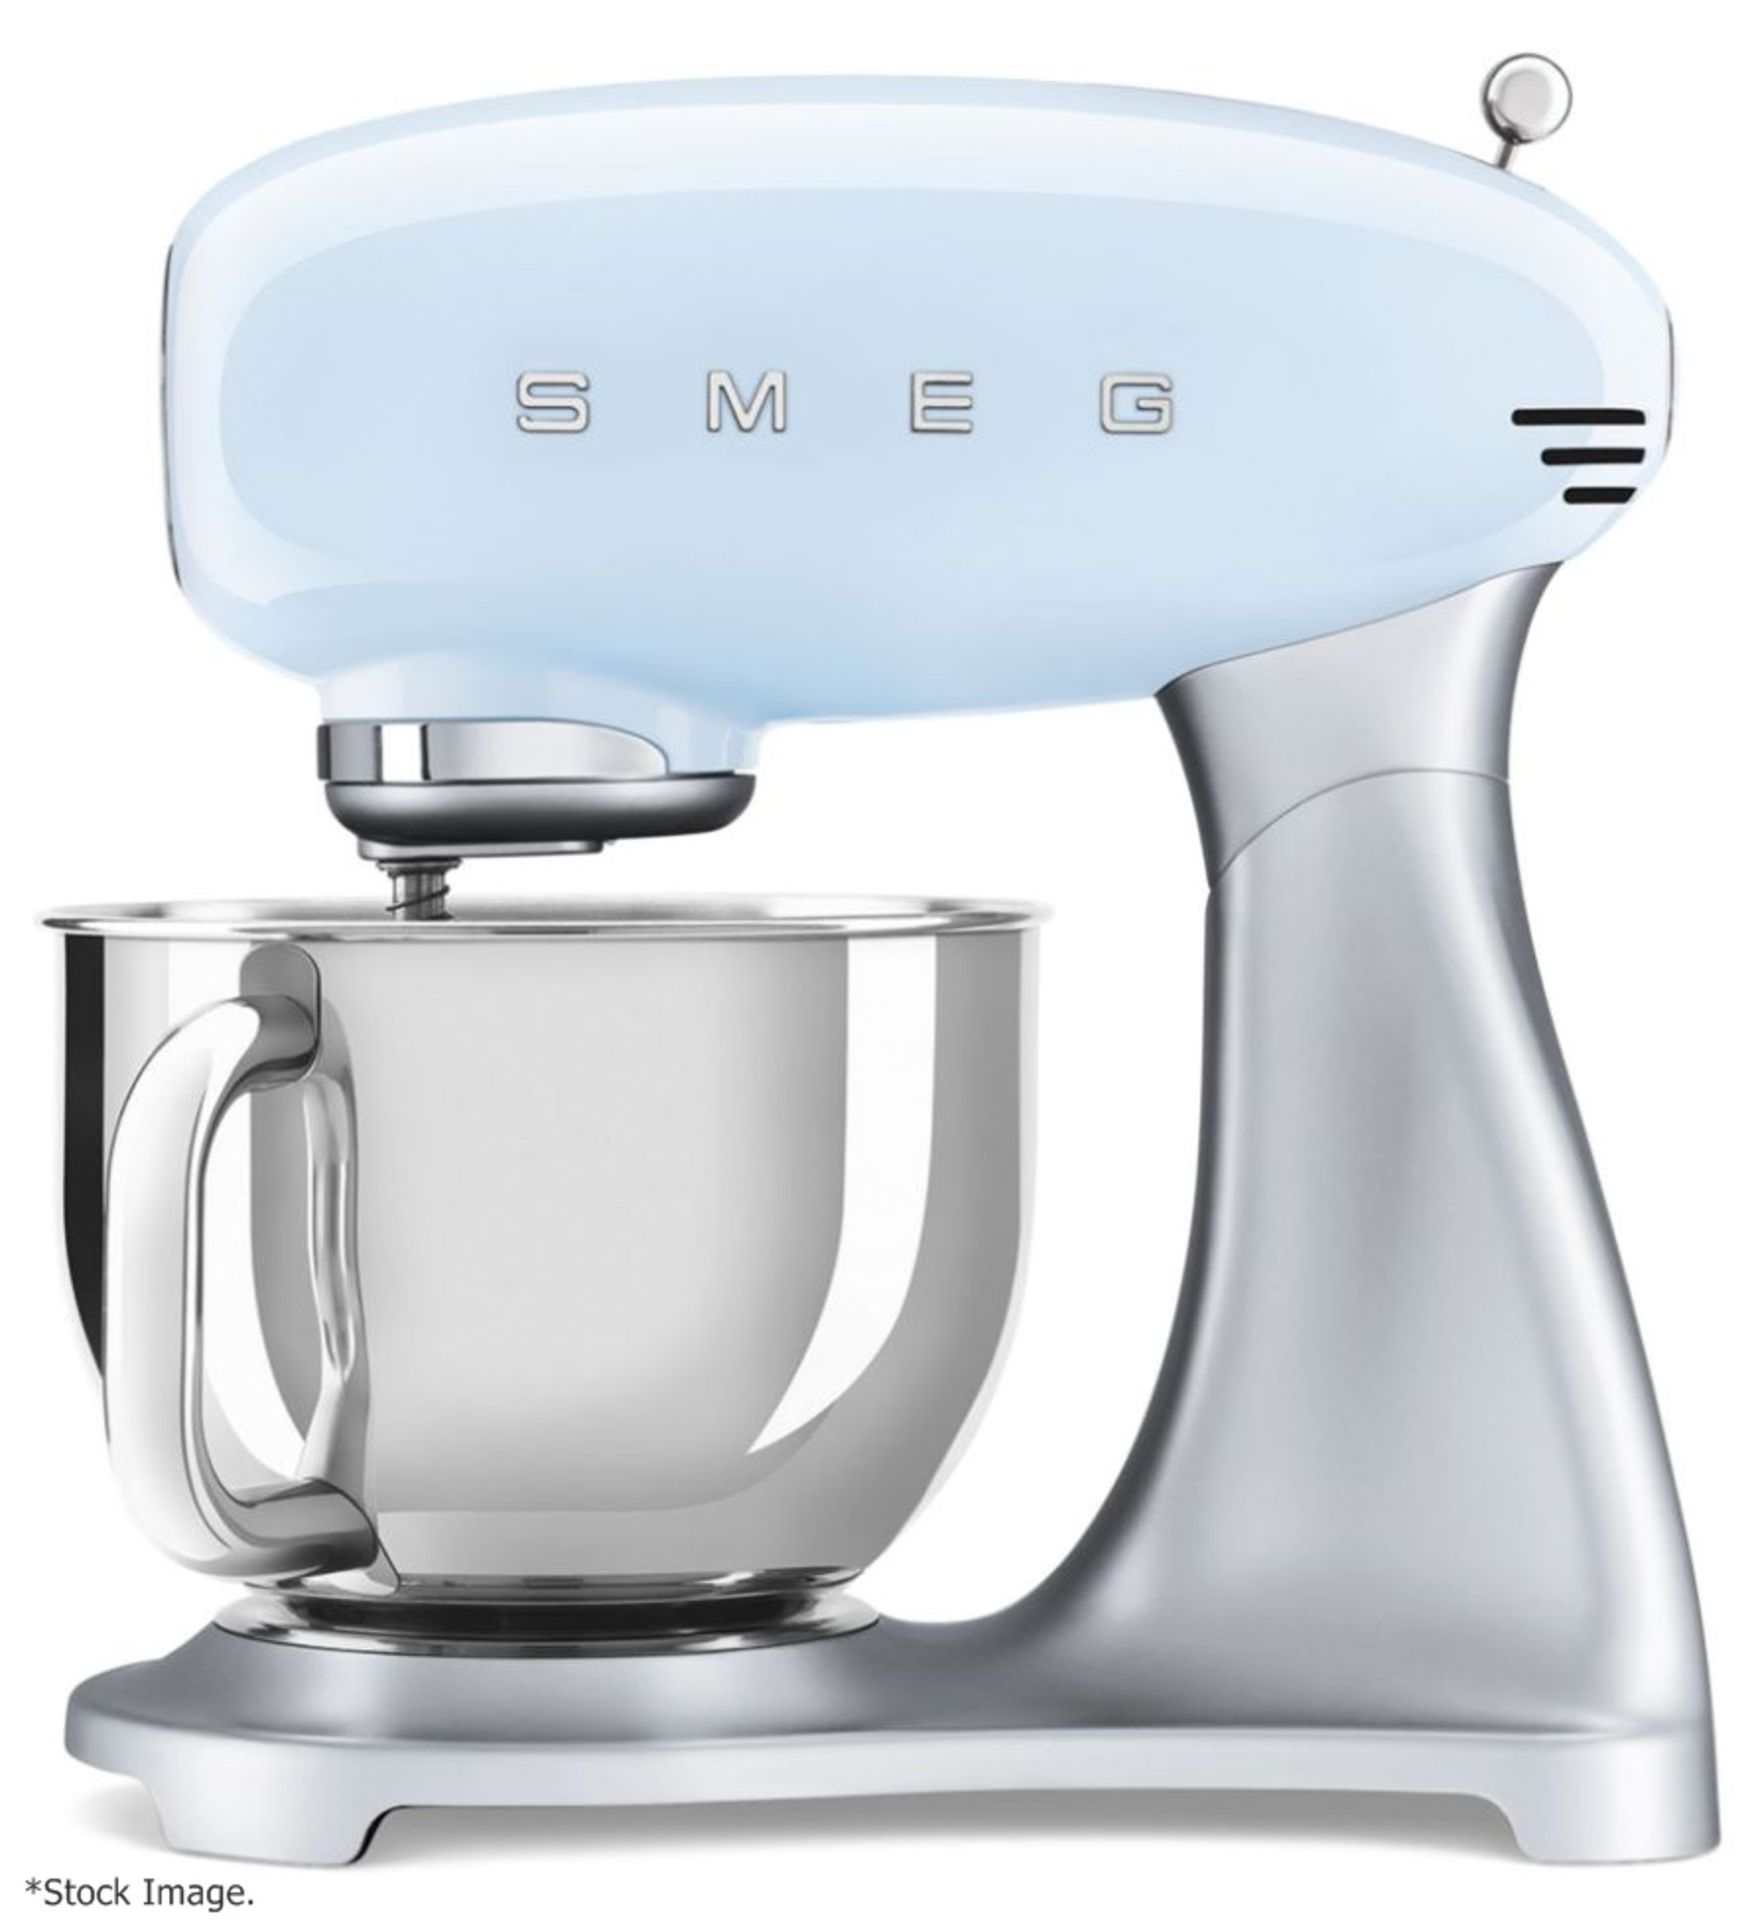 1 x SMEG 50'S Style Stand Mixer In Pale Blue (4.8L) Original Price £449.00 - Ex-Display - CL987 - - Image 2 of 14